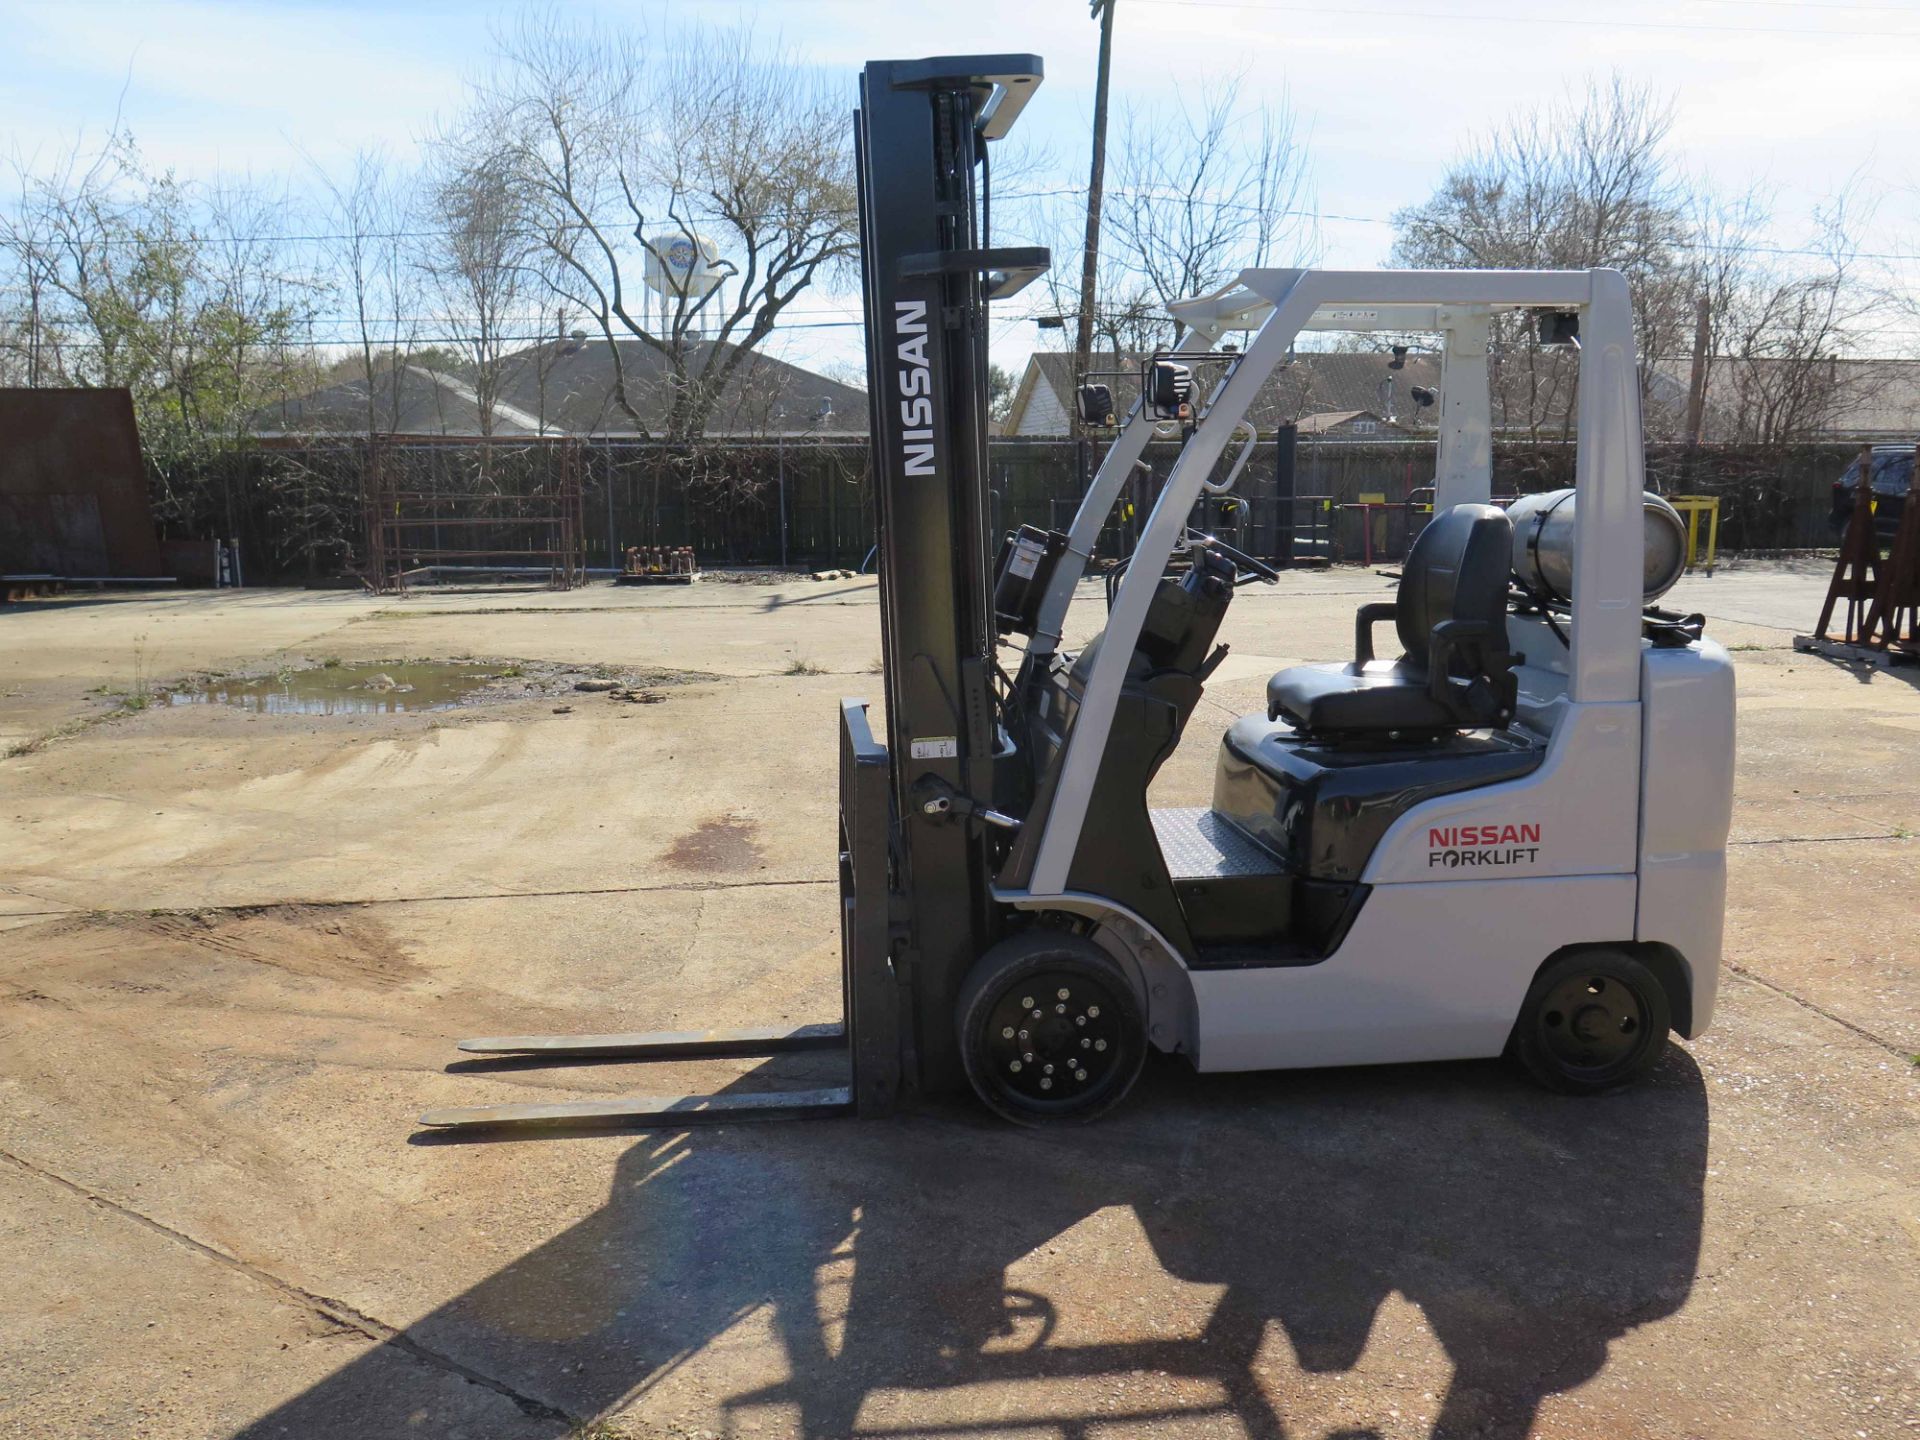 LPG FORKLIFT, NISSAN 5,000 LB. CAP. MDL. MCP1F2A25LV, new 2013, LPG, 3-stage mast, 238" max. lift - Image 4 of 9